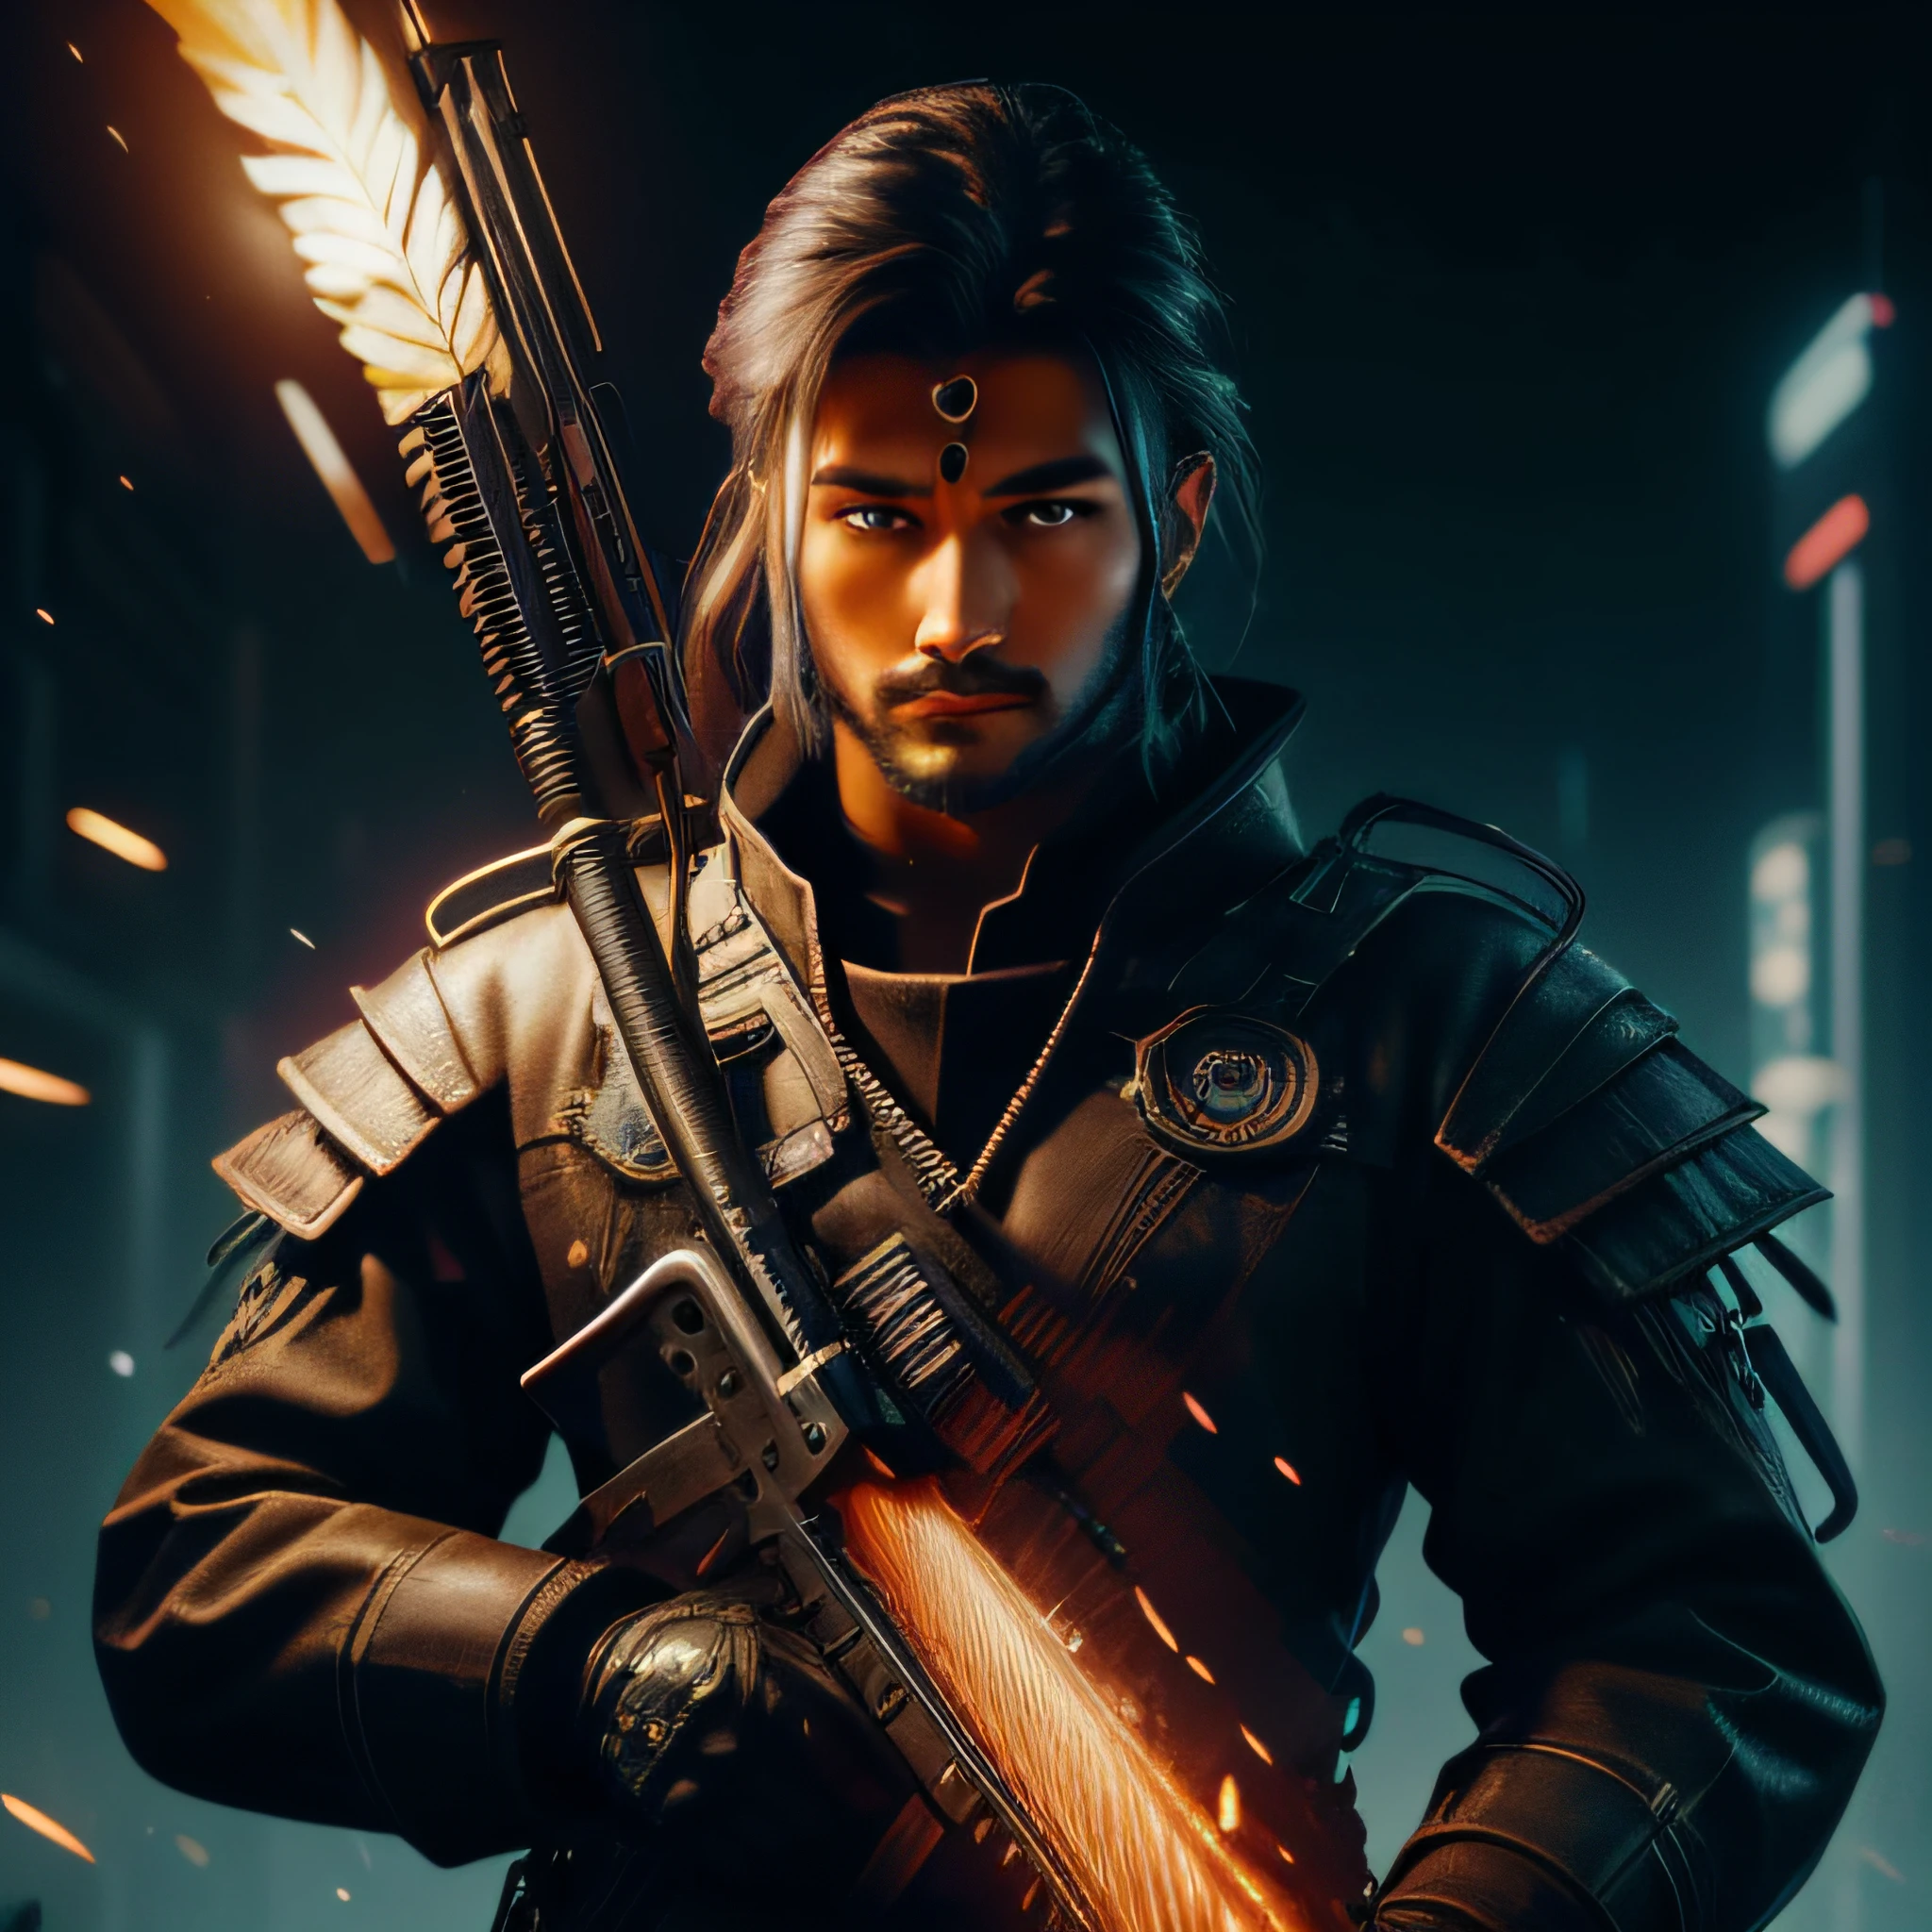 (best quality,4K,8K,hight resolution,​masterpiece:1.2),Ultra-detail,(realisti,fotorealisti,fotorealisti:1.37),Marcus Söder as an Indian with a feather at the campfire in cyberpunk style, Oil painting, Vivid colors, atmospheric lighting, detailed facial features, intense look, Traditional Indian clothing, expressive mouth, Flickering flames, Dystopian city skyline in the background, neon lights, Glowing tattoos, Glowing cybernetic enhancements, Hazy smoke, Futuristic weapons, futuristic Indian tribe, Surreal elements, Dark and mysterious ambience.